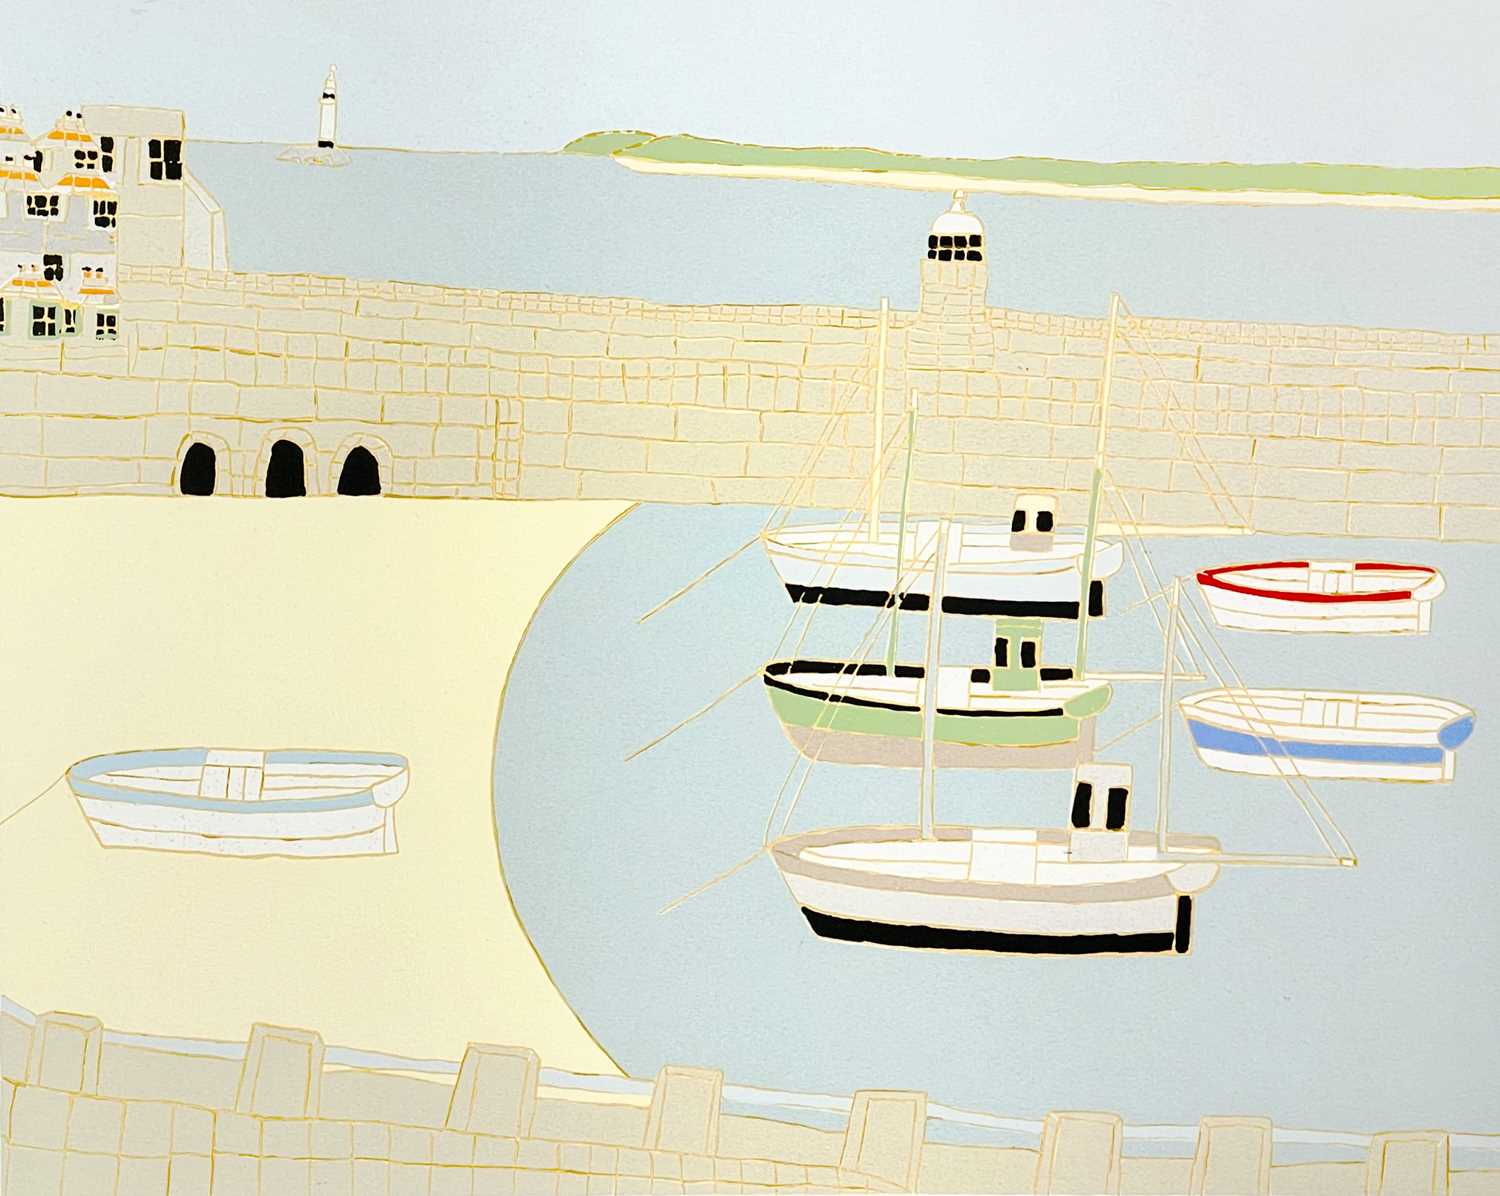 Bryan PEARCE (1929-2006) St Ives Screenprint Signed and dated '90 42x52cm sight size Provenance:-